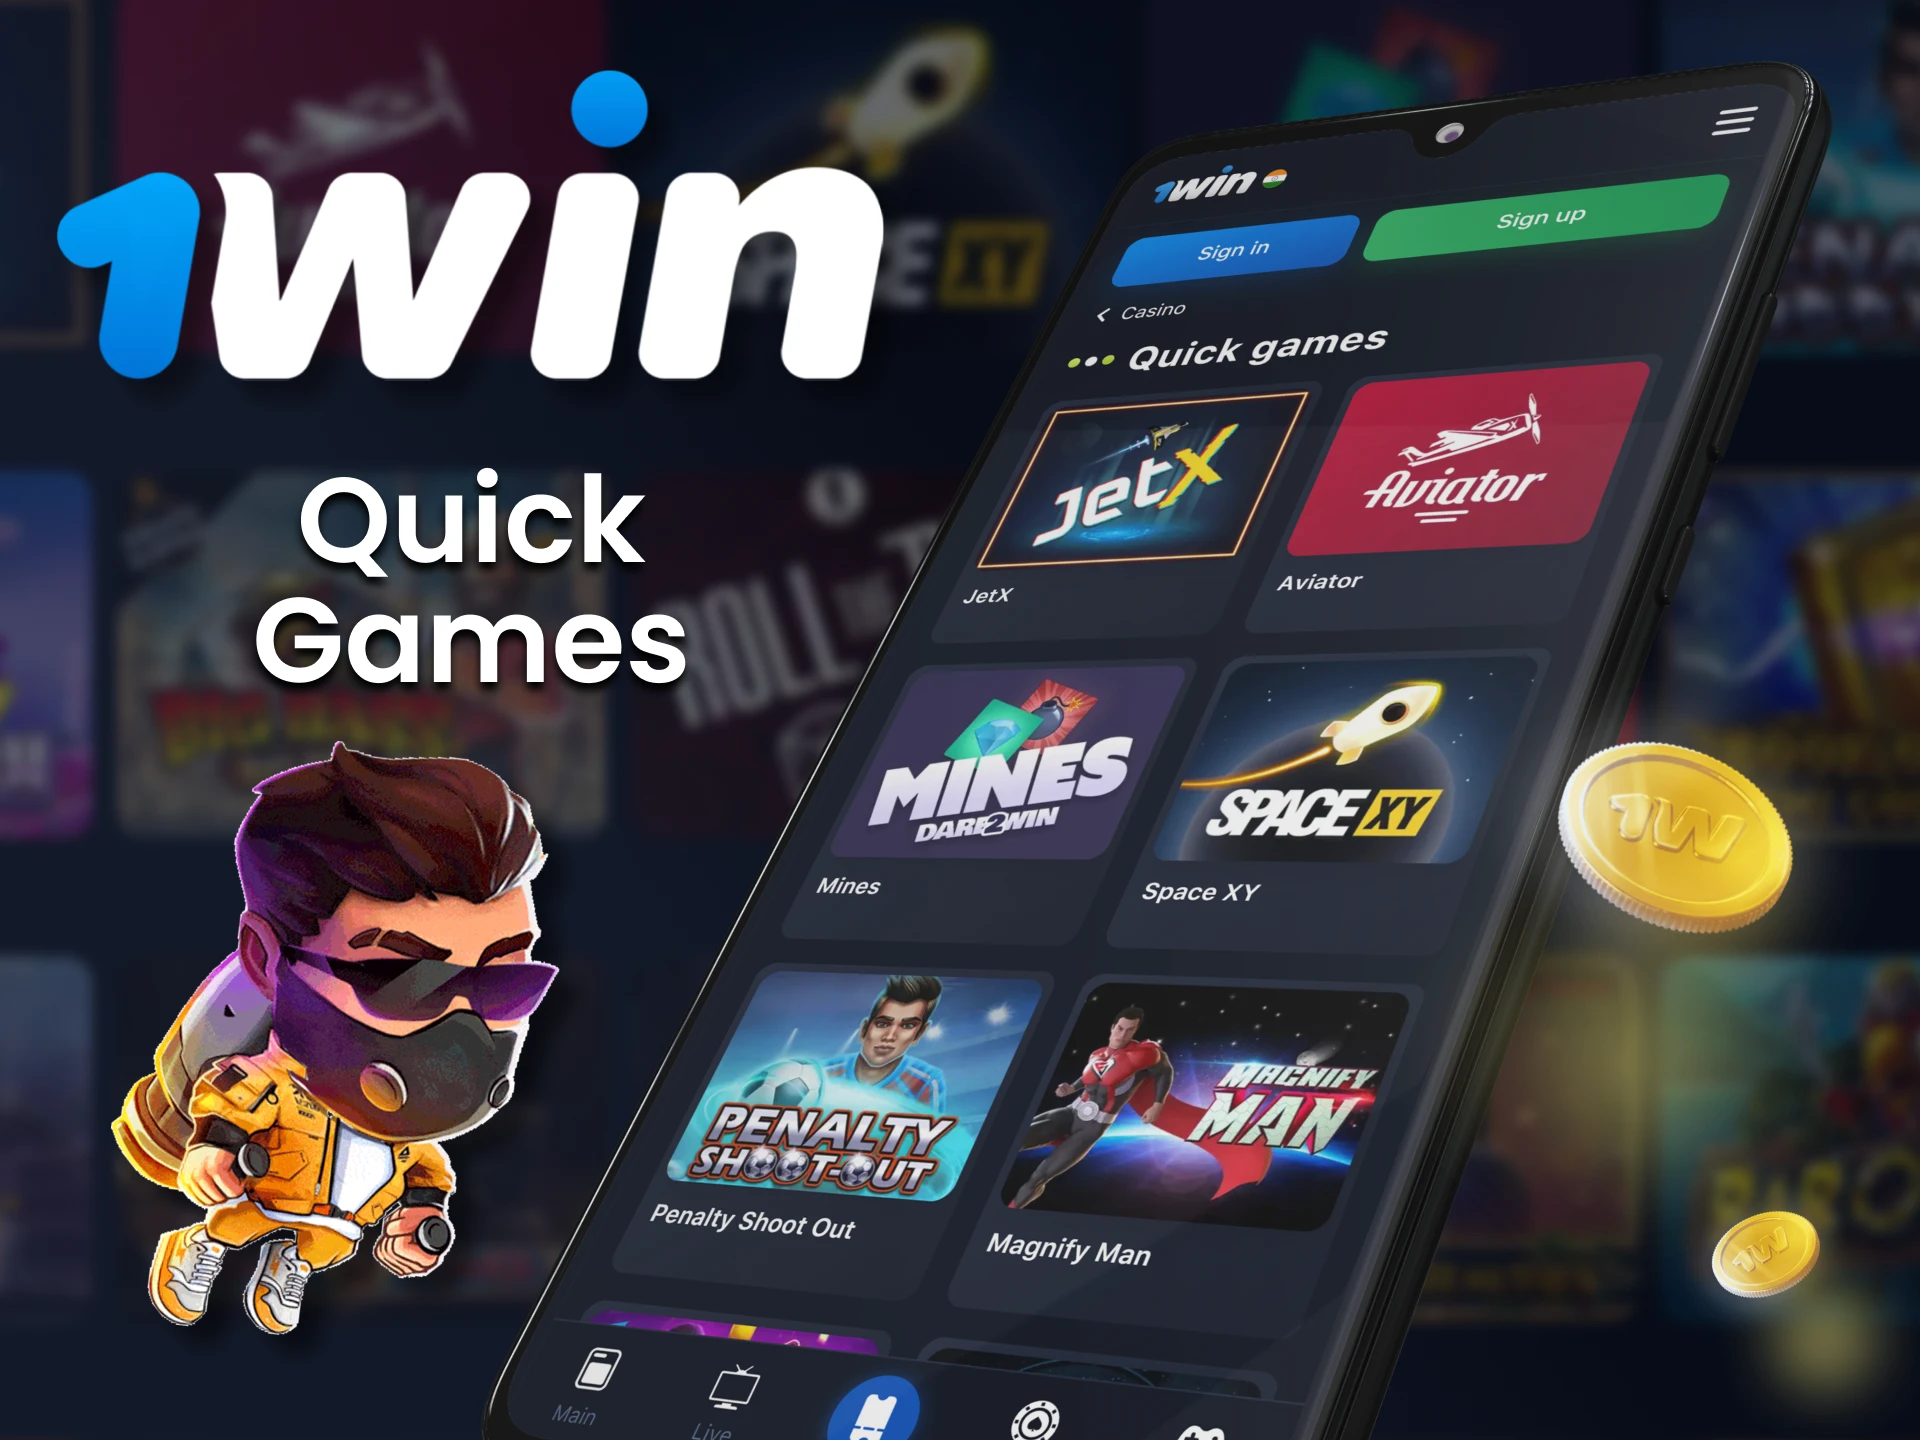 On 1Win, play quick games on your phone.